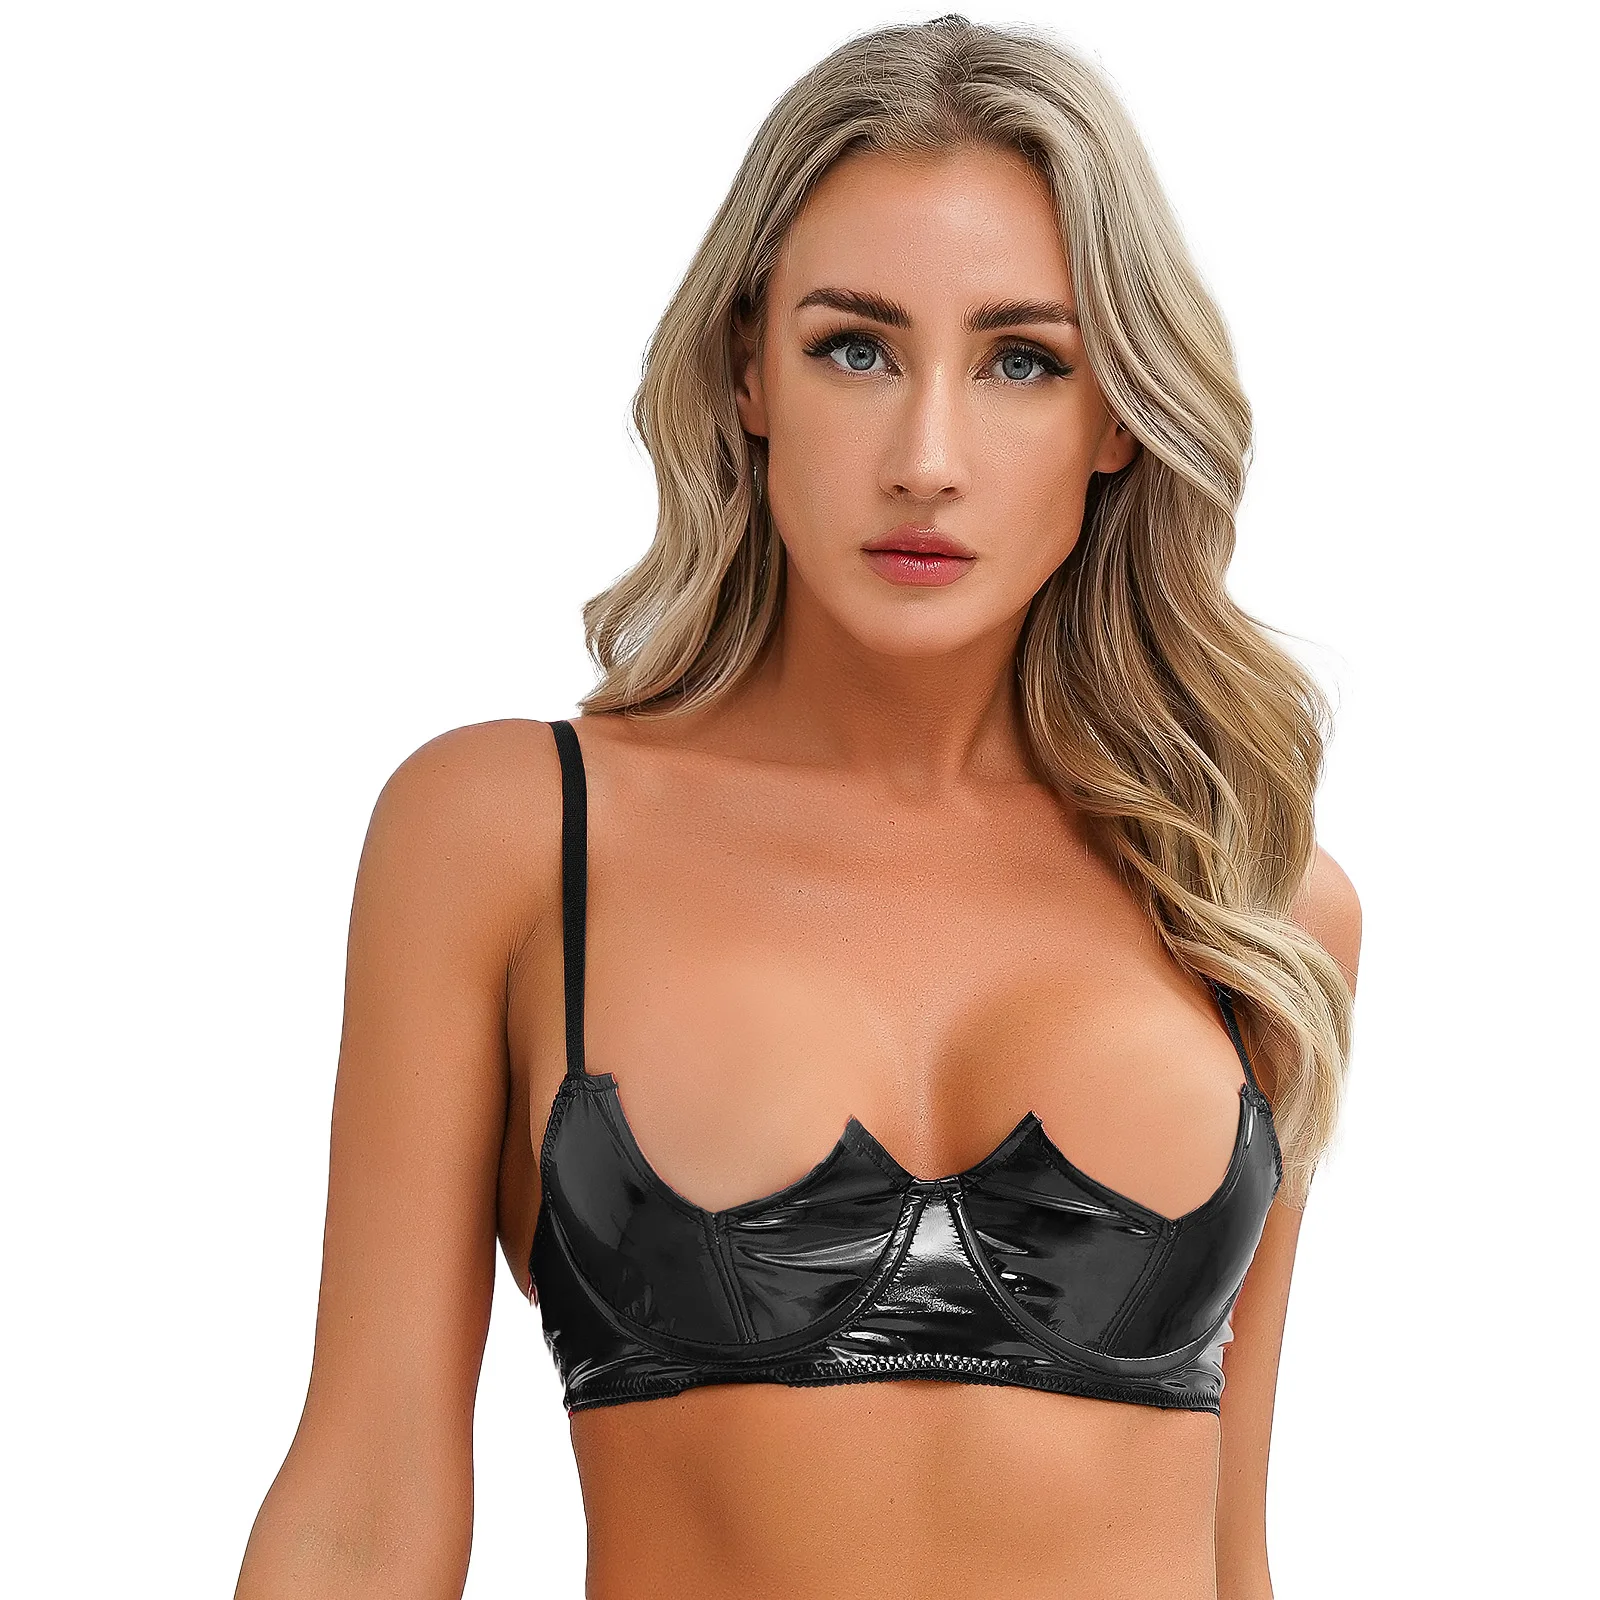 

Womens Sexy Half Cup Bra Underwired Bra Tops Solid Shiny Wet Look Patent Leather Brassiere Lingerie Exotic Tanks Top Bralette